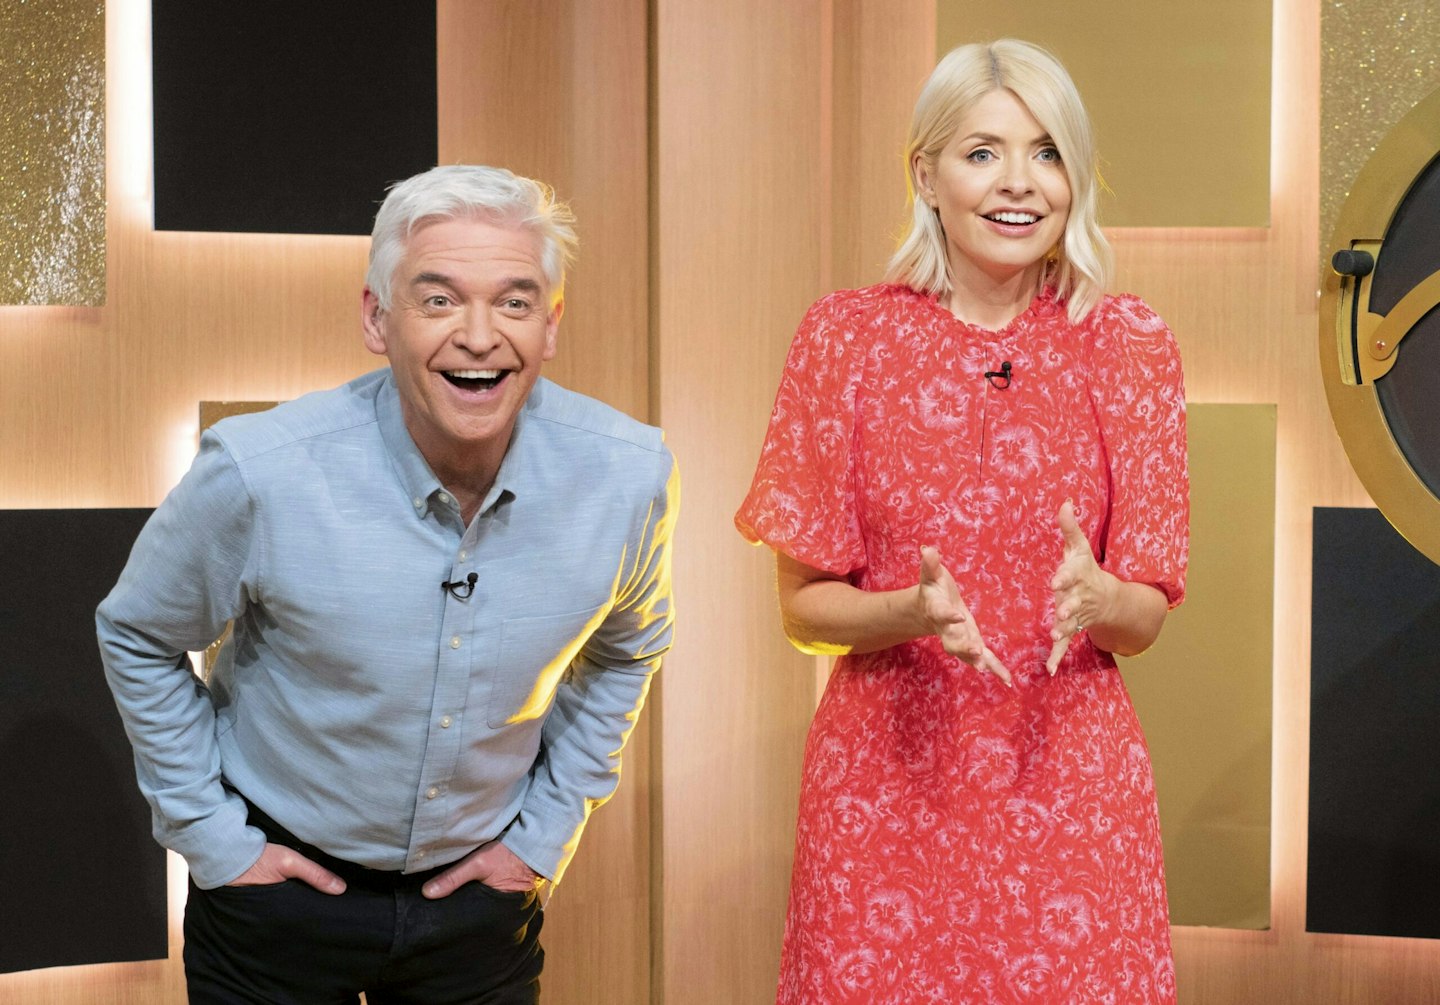 Holly Willoughby and Phillip Schofield hosting This Morning